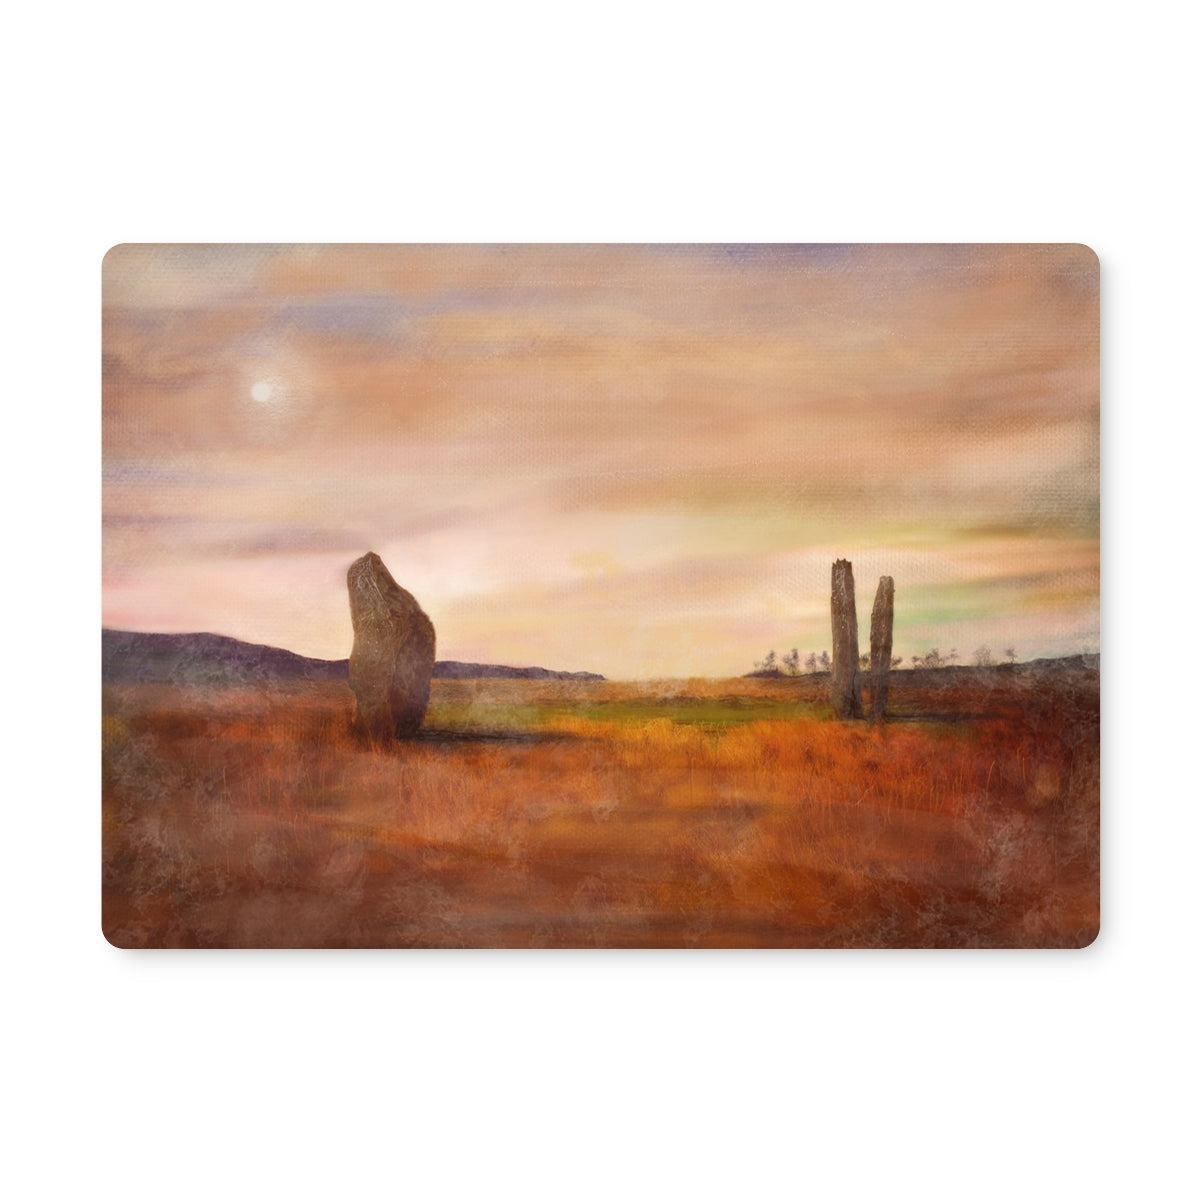 Machrie Moor Arran Art Gifts Placemat-Placemats-Arran Art Gallery-Single Placemat-Paintings, Prints, Homeware, Art Gifts From Scotland By Scottish Artist Kevin Hunter